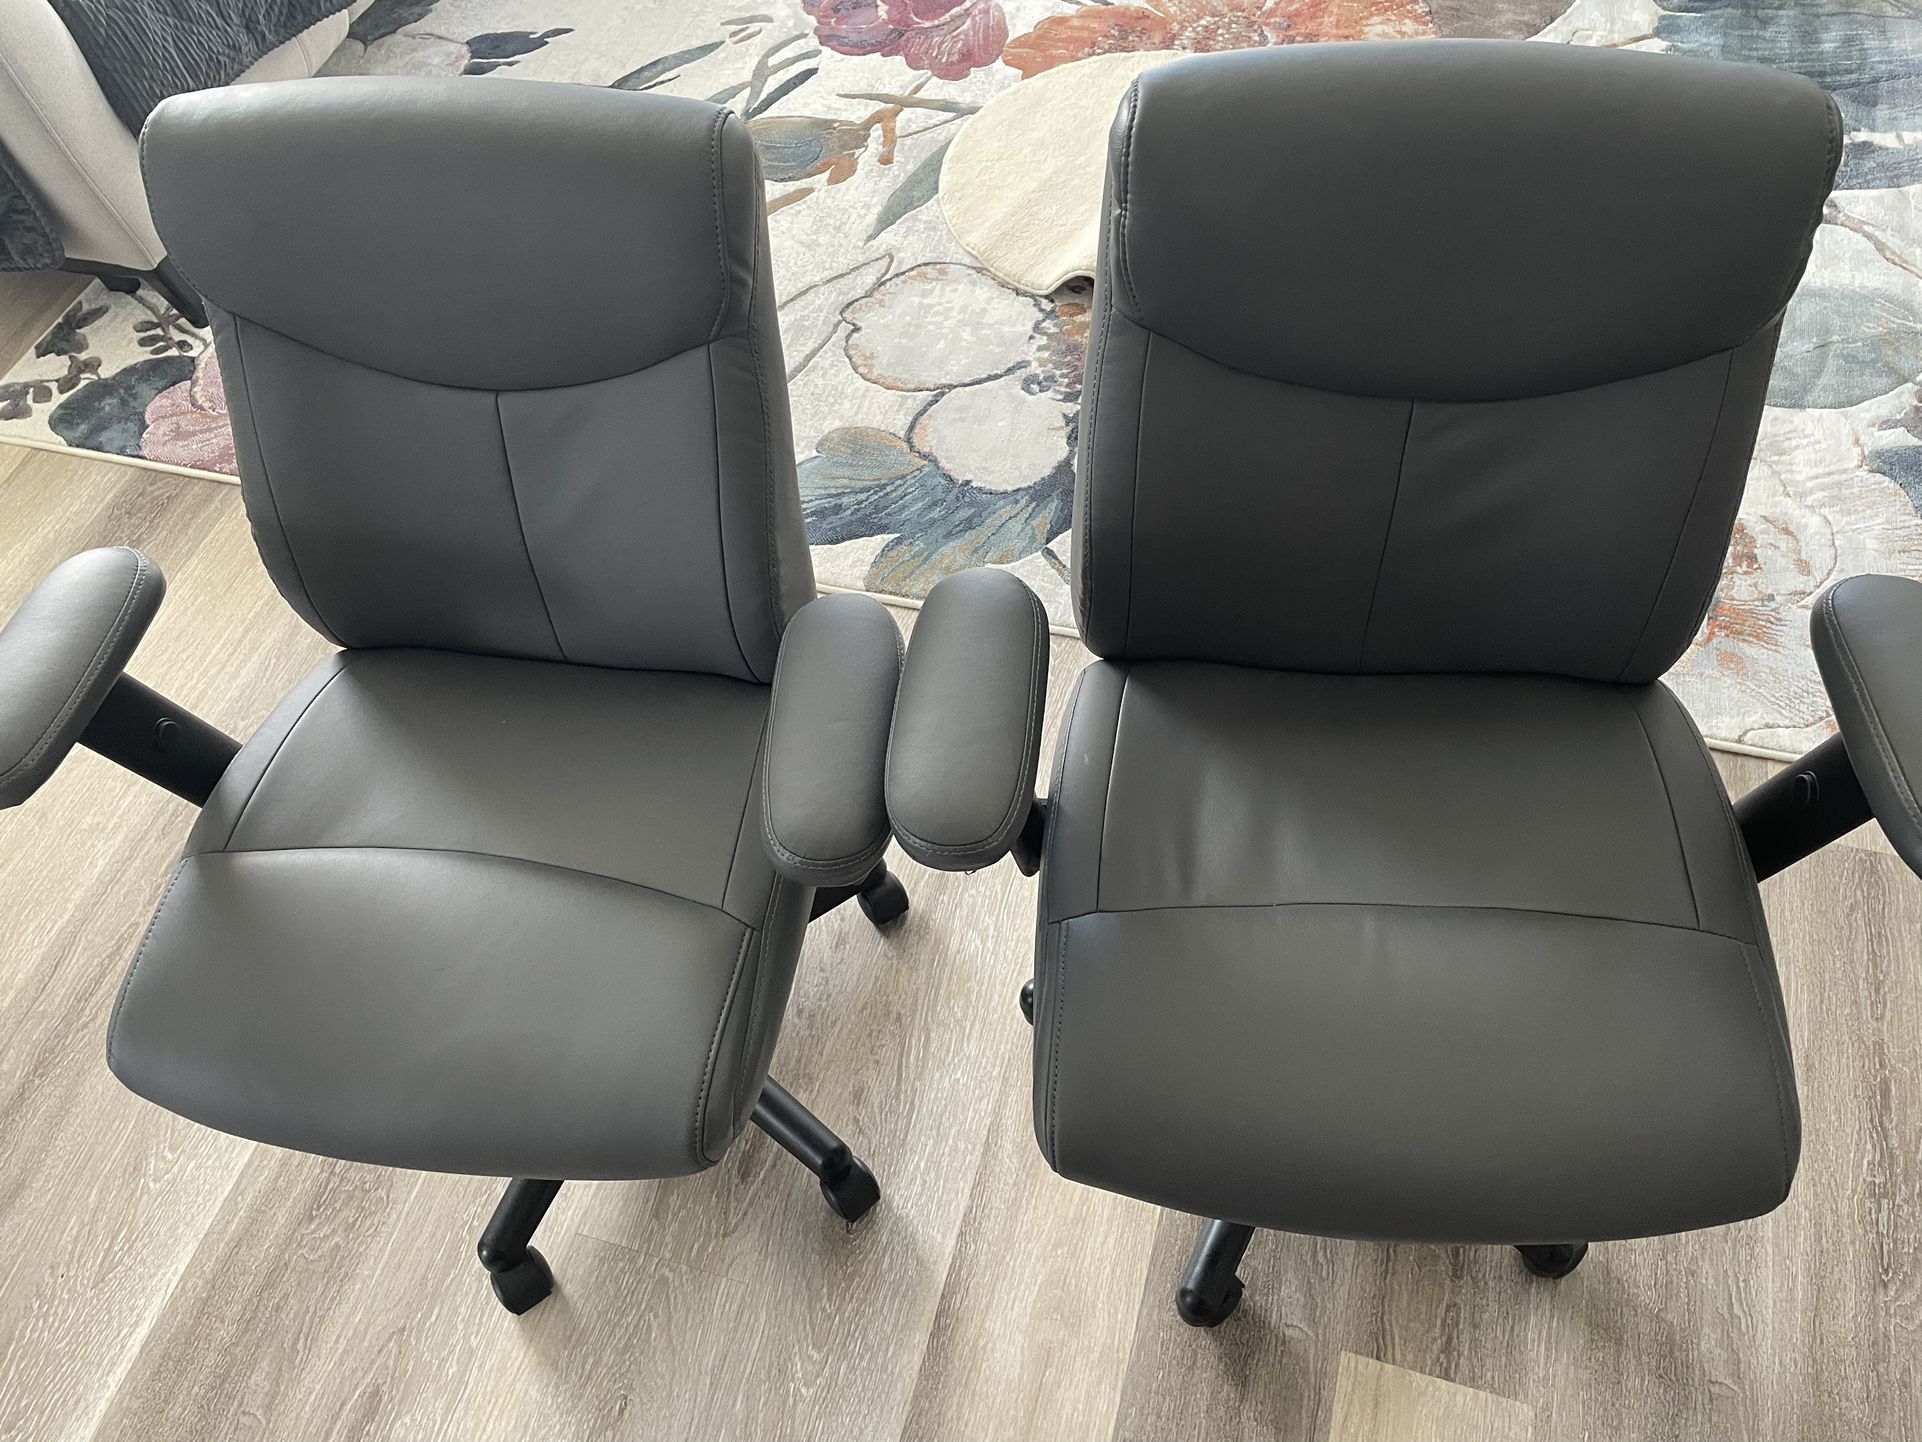 Two New Cushion Computer Chairs 